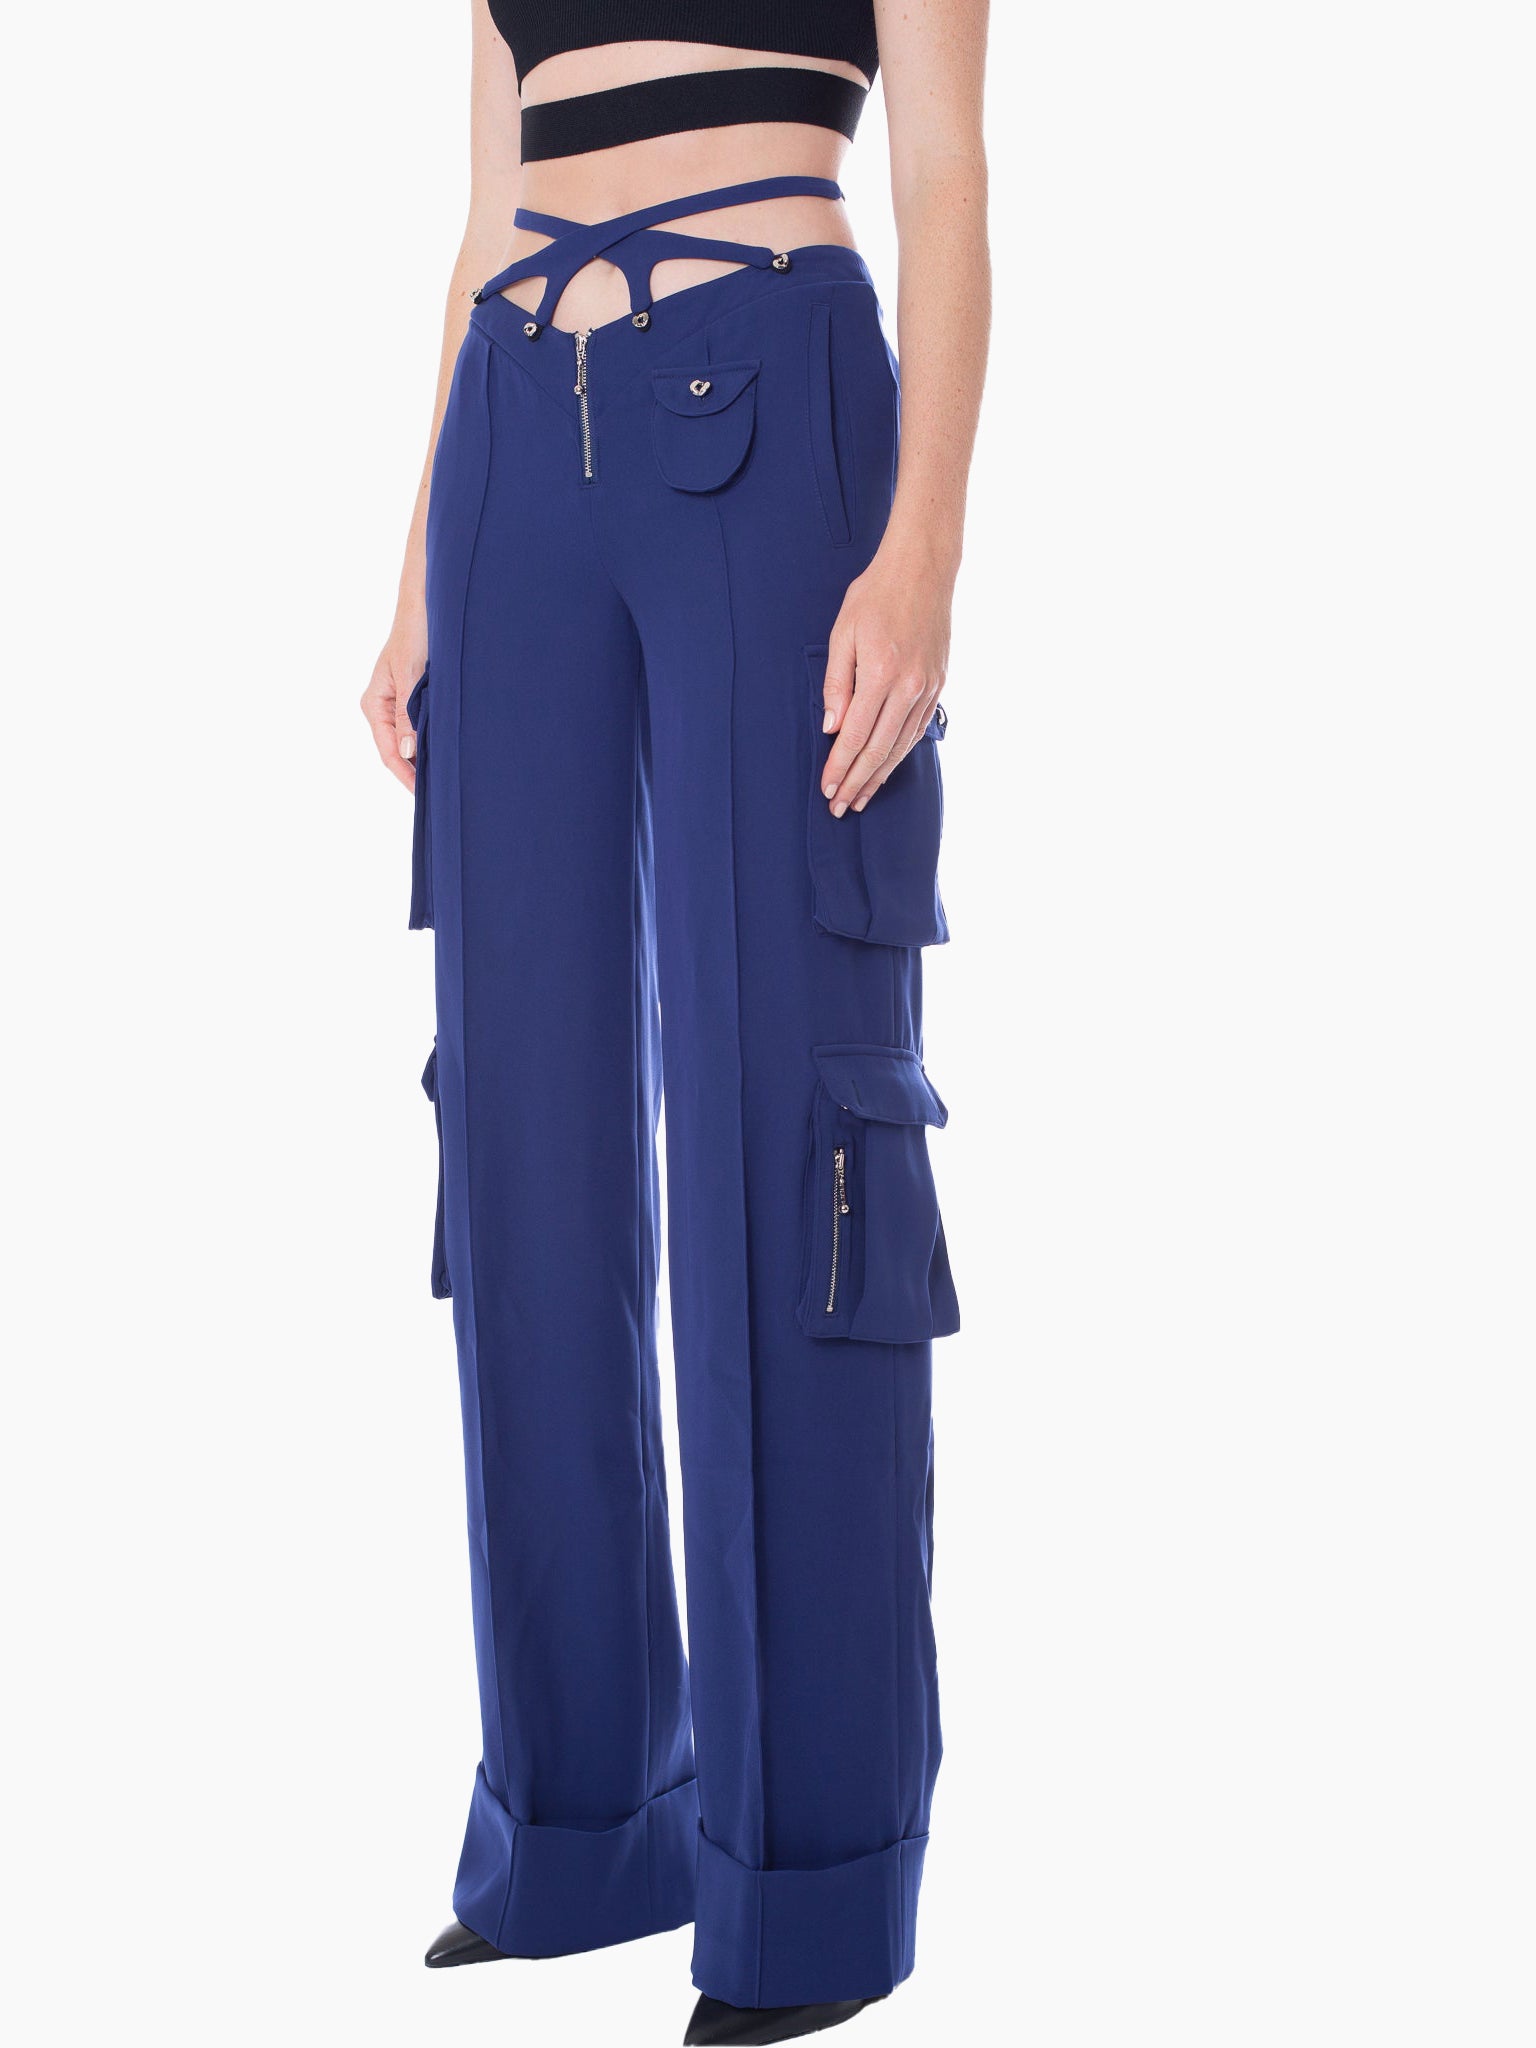 HAN WEN STUDIO V-waist Cargo Pant with Detachable Strappy Waistbands